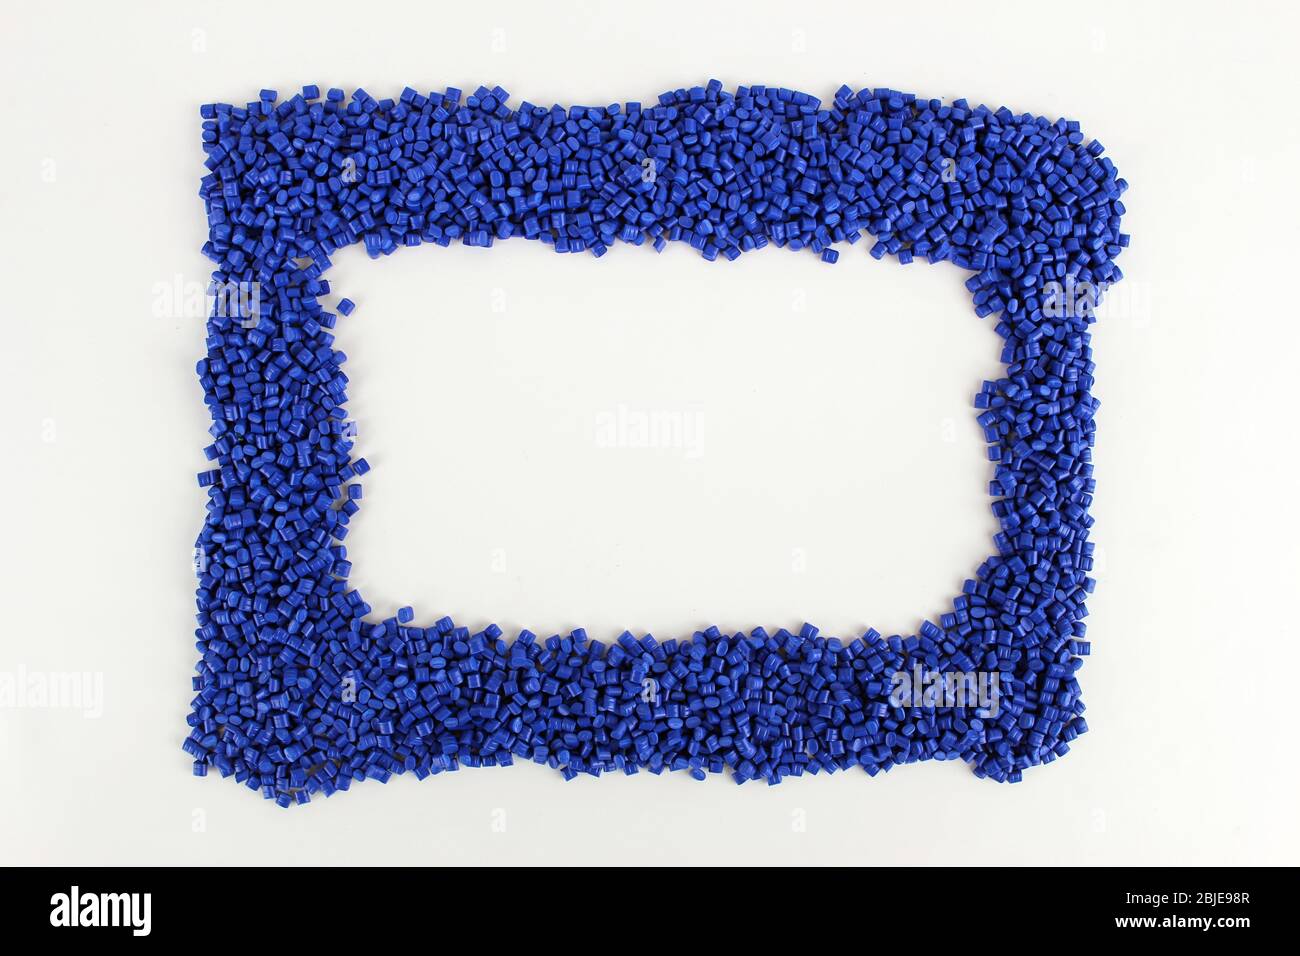 The geometric figure formed by polymers, plastic, which represents a frame with a white background inside. Stock Photo